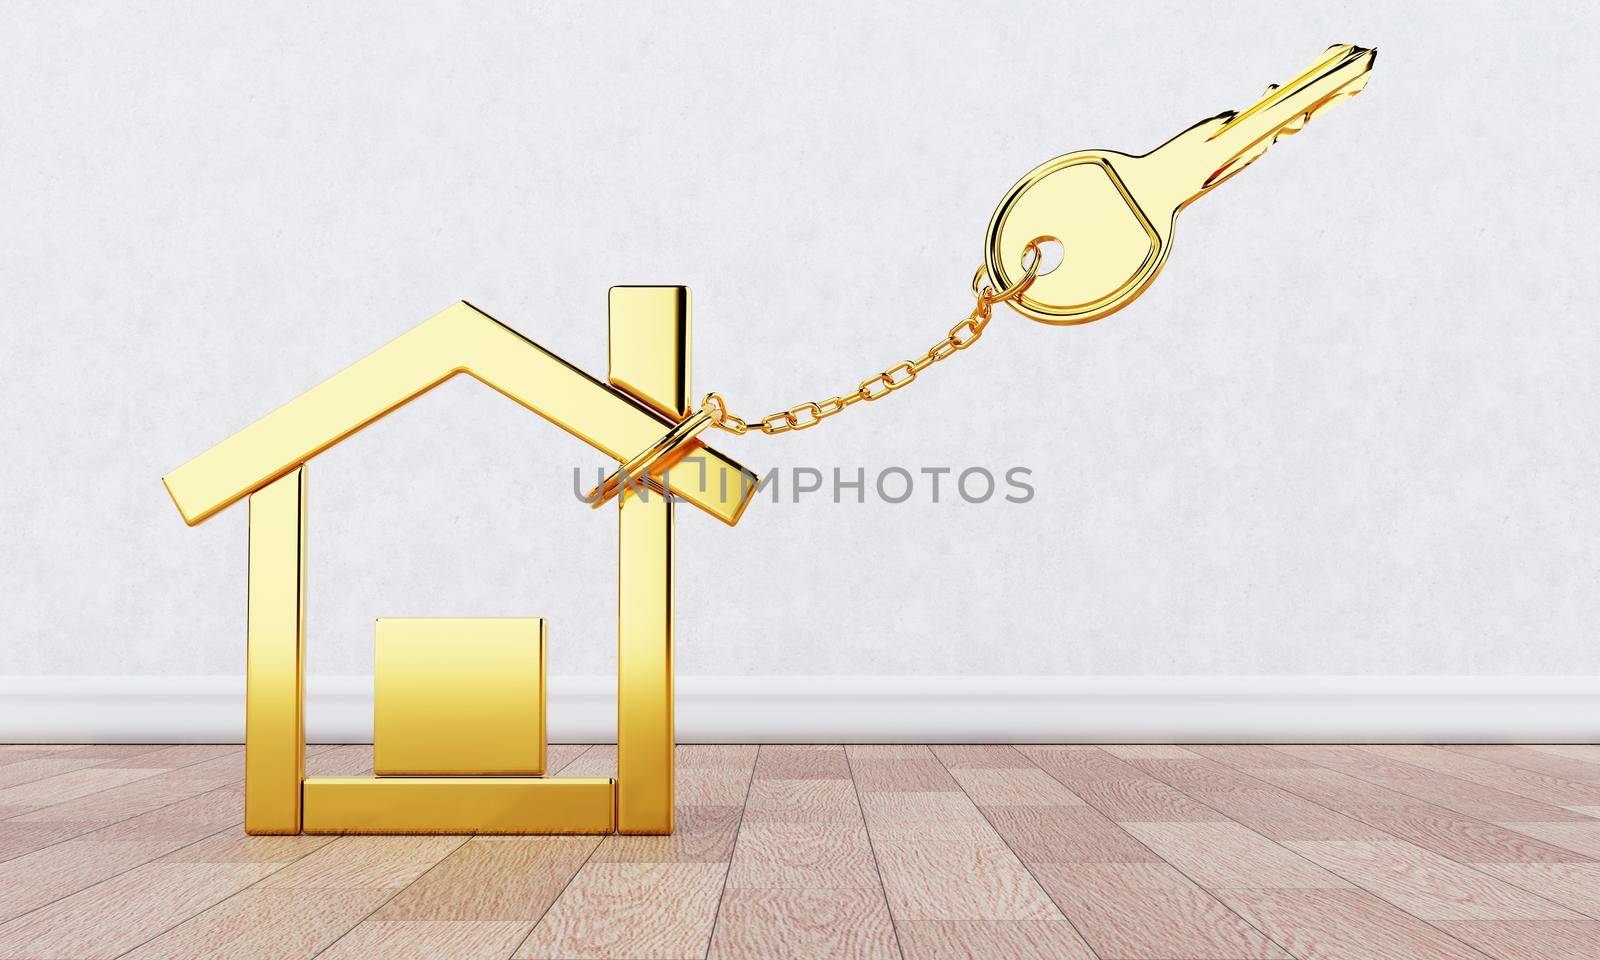 Gold key chain with golden modern house shape key holder on wooden floor and white wall background. Business construction and architecture concept. 3D illustration rendering by MiniStocker